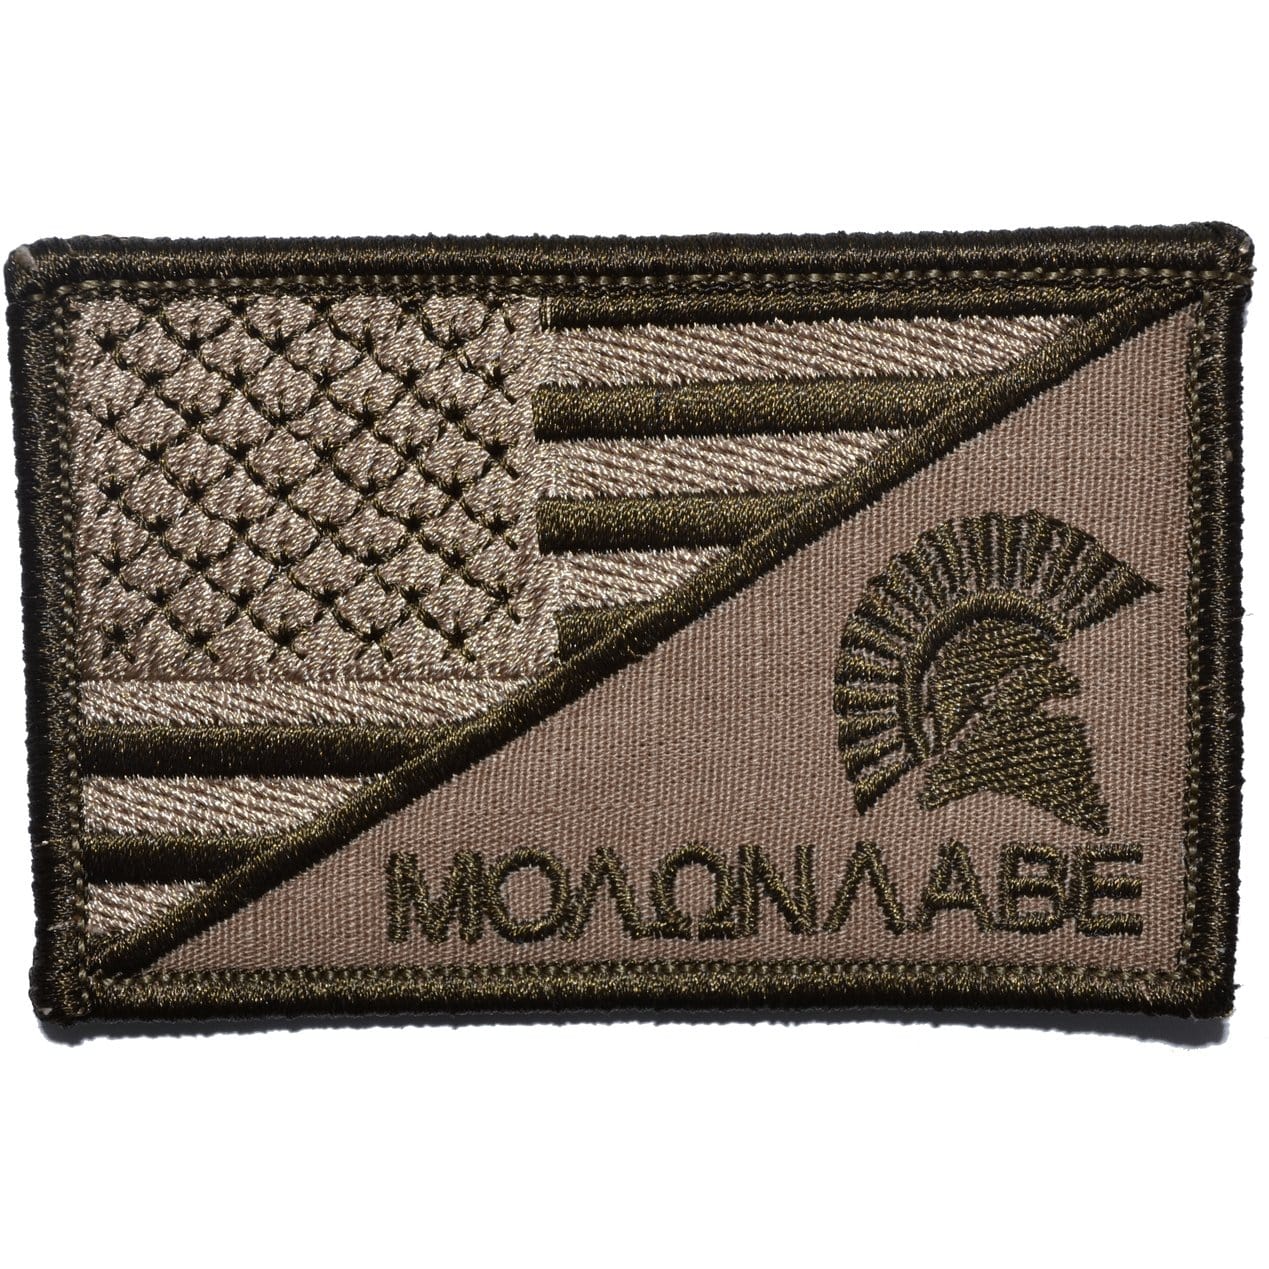 Tactical Gear Junkie Patches Coyote Brown Molon Labe Spartan Helmet USA Flag - 2.25x3.5 Patch